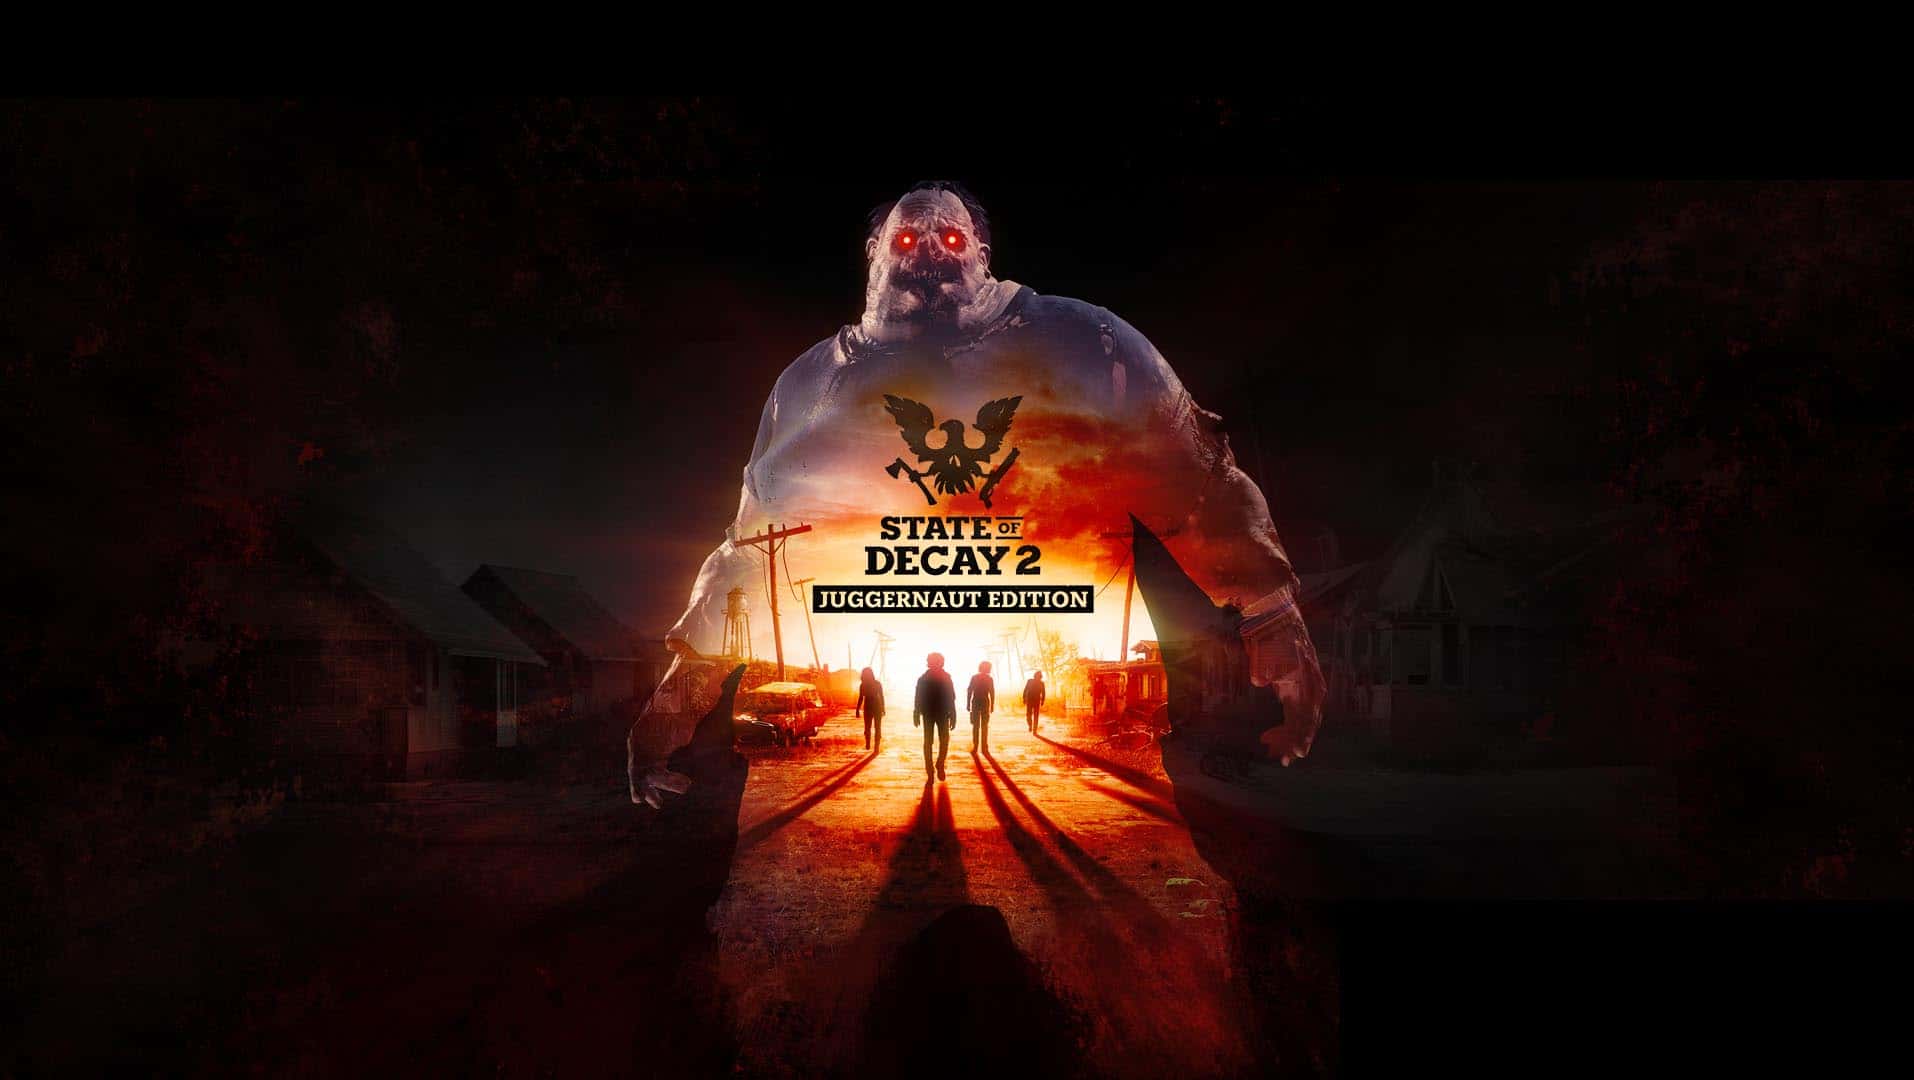 State Of Decay 2 Juggernaut Edition Trainer 35 Download Trainer Free